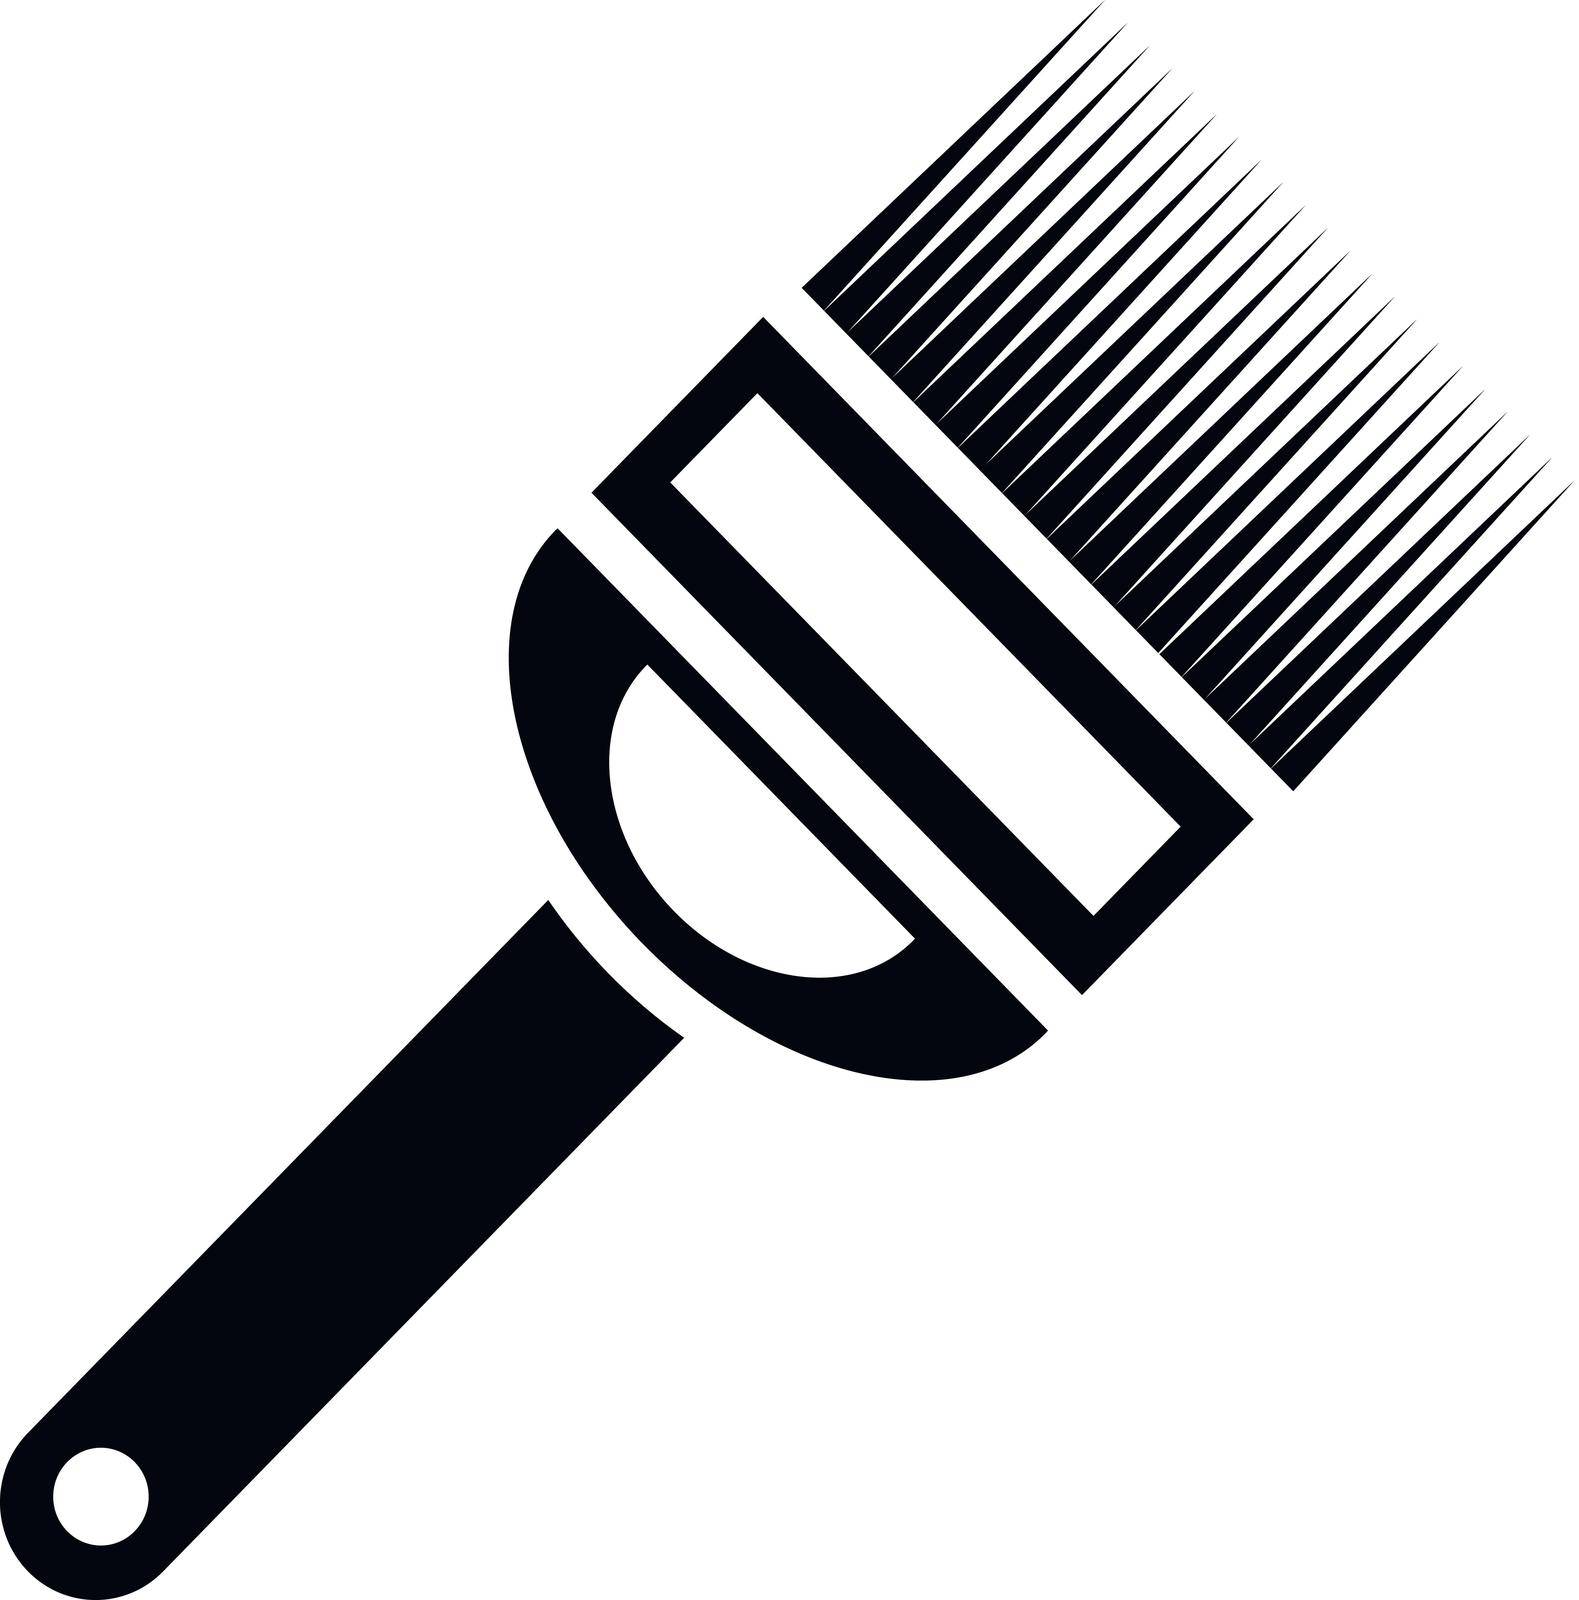 Uncapping fork icon in simple style on a white background